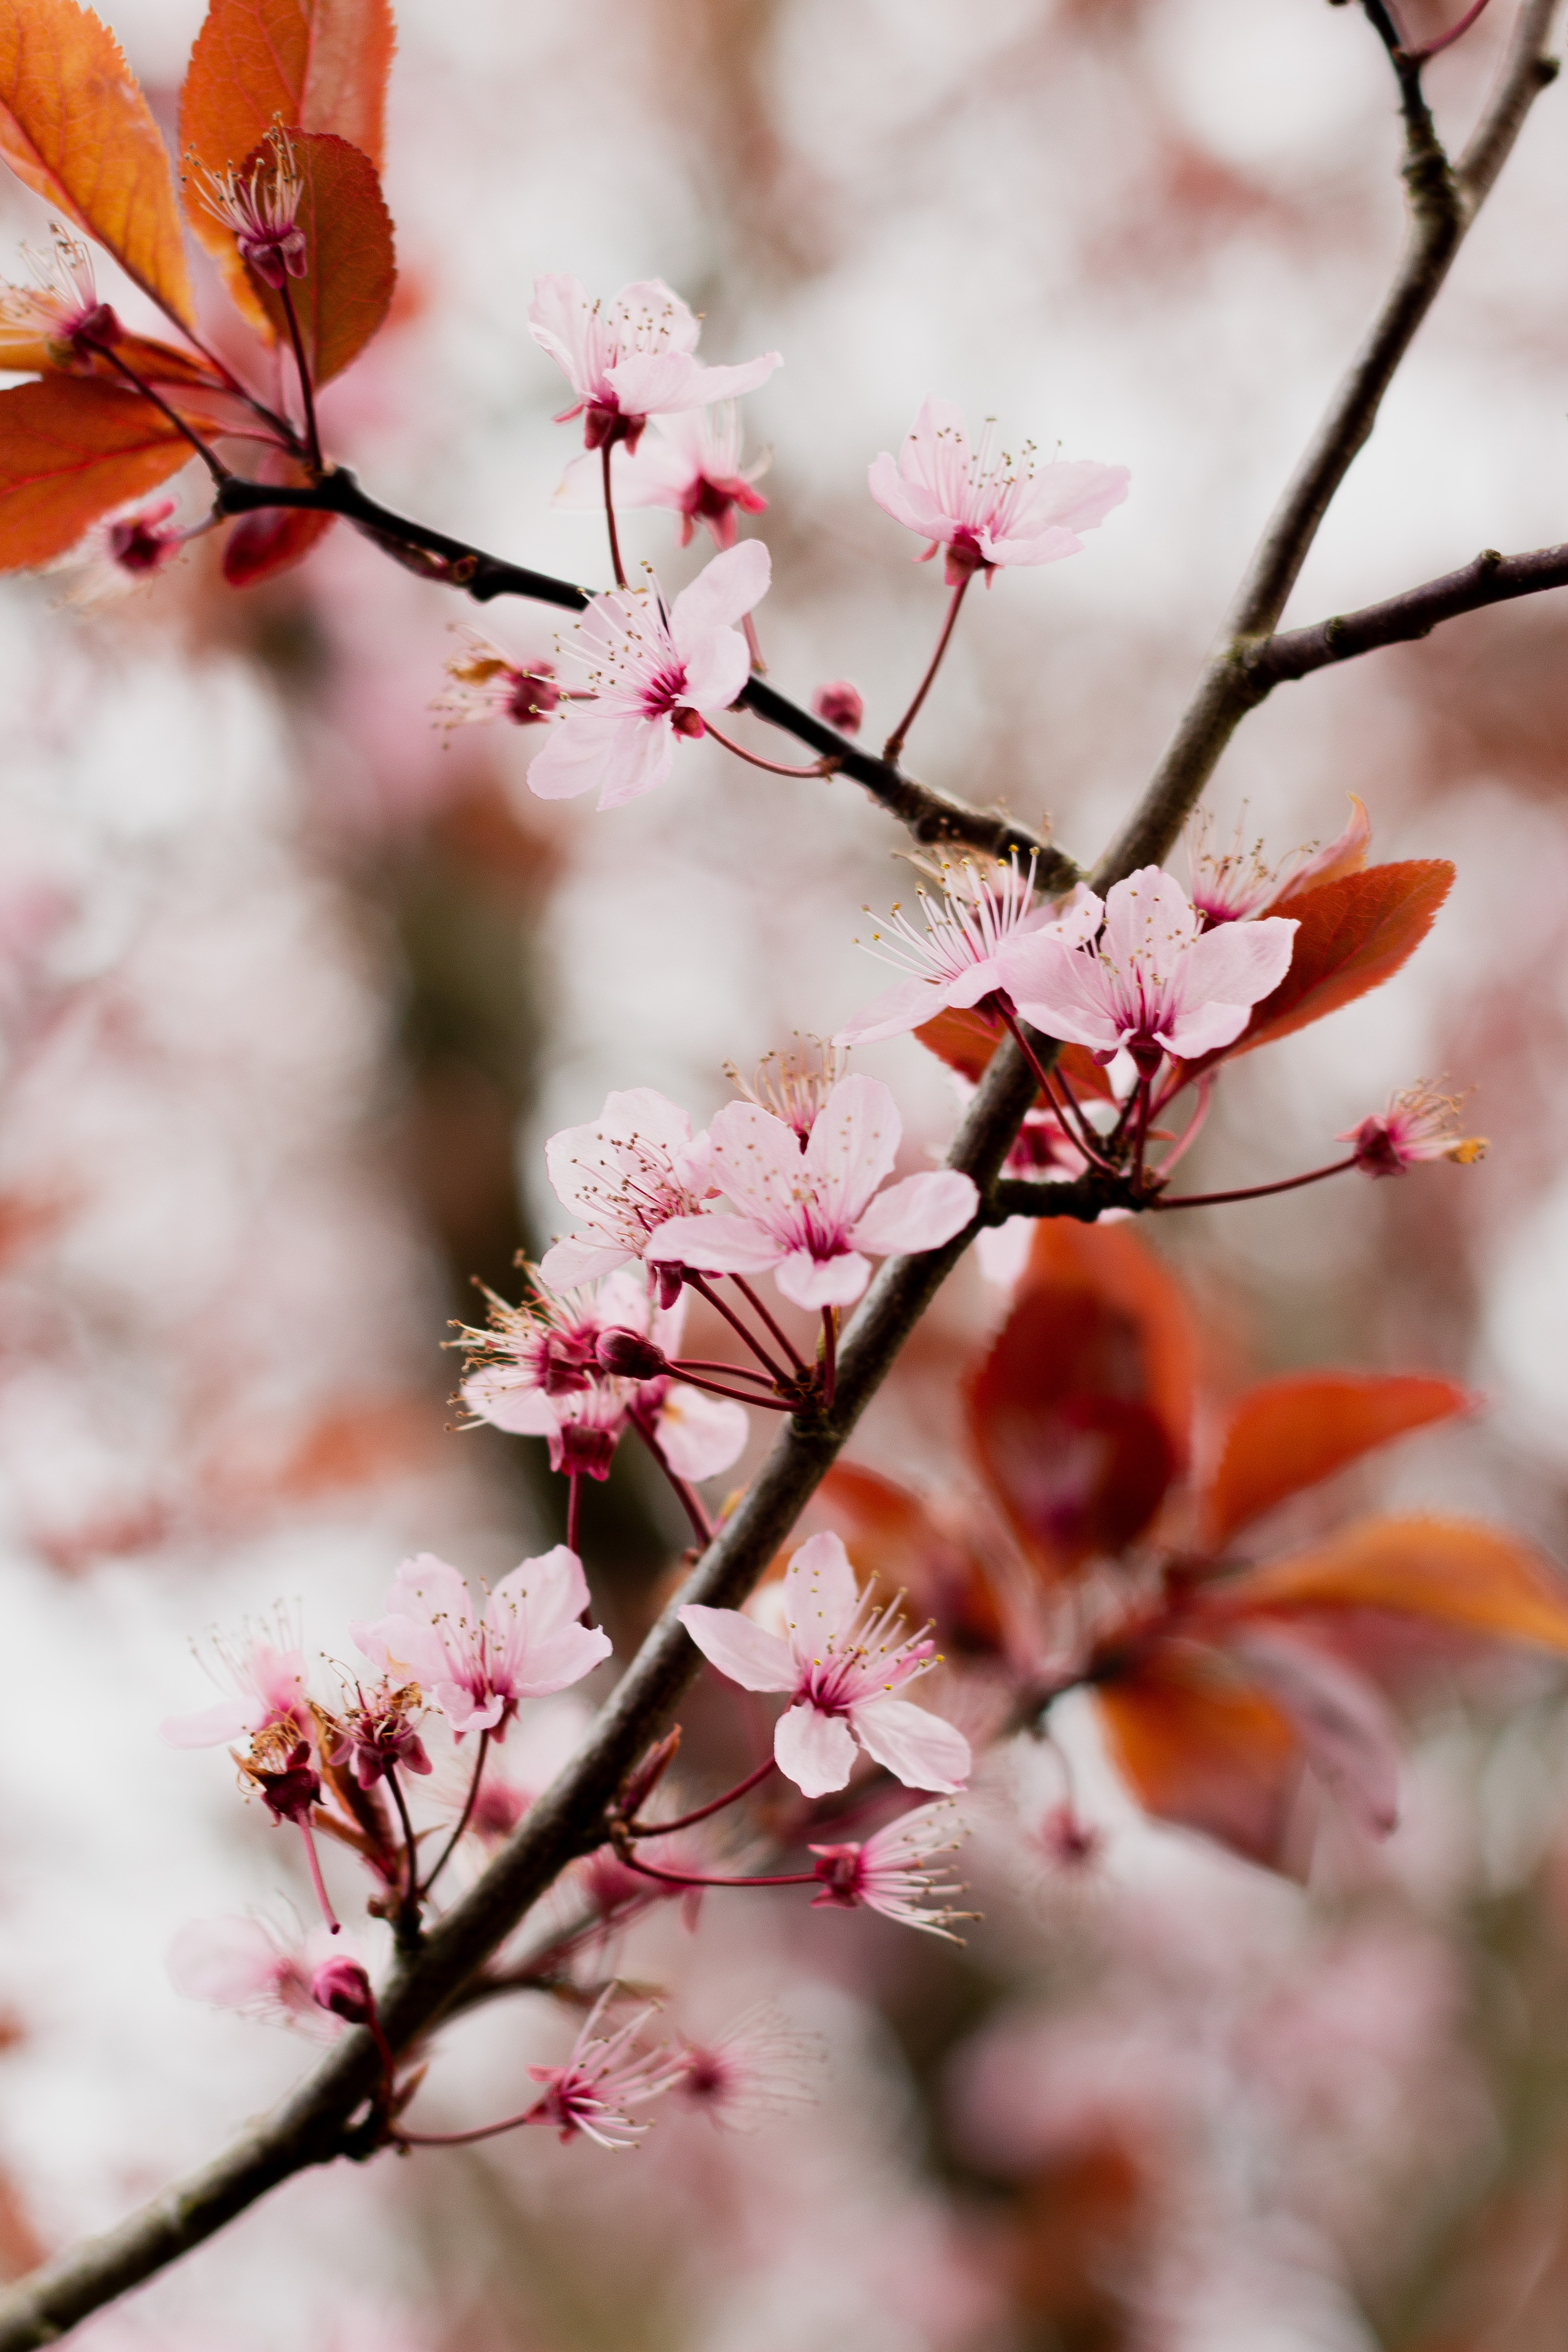 Best Cherry Blossom wallpapers for phone screen